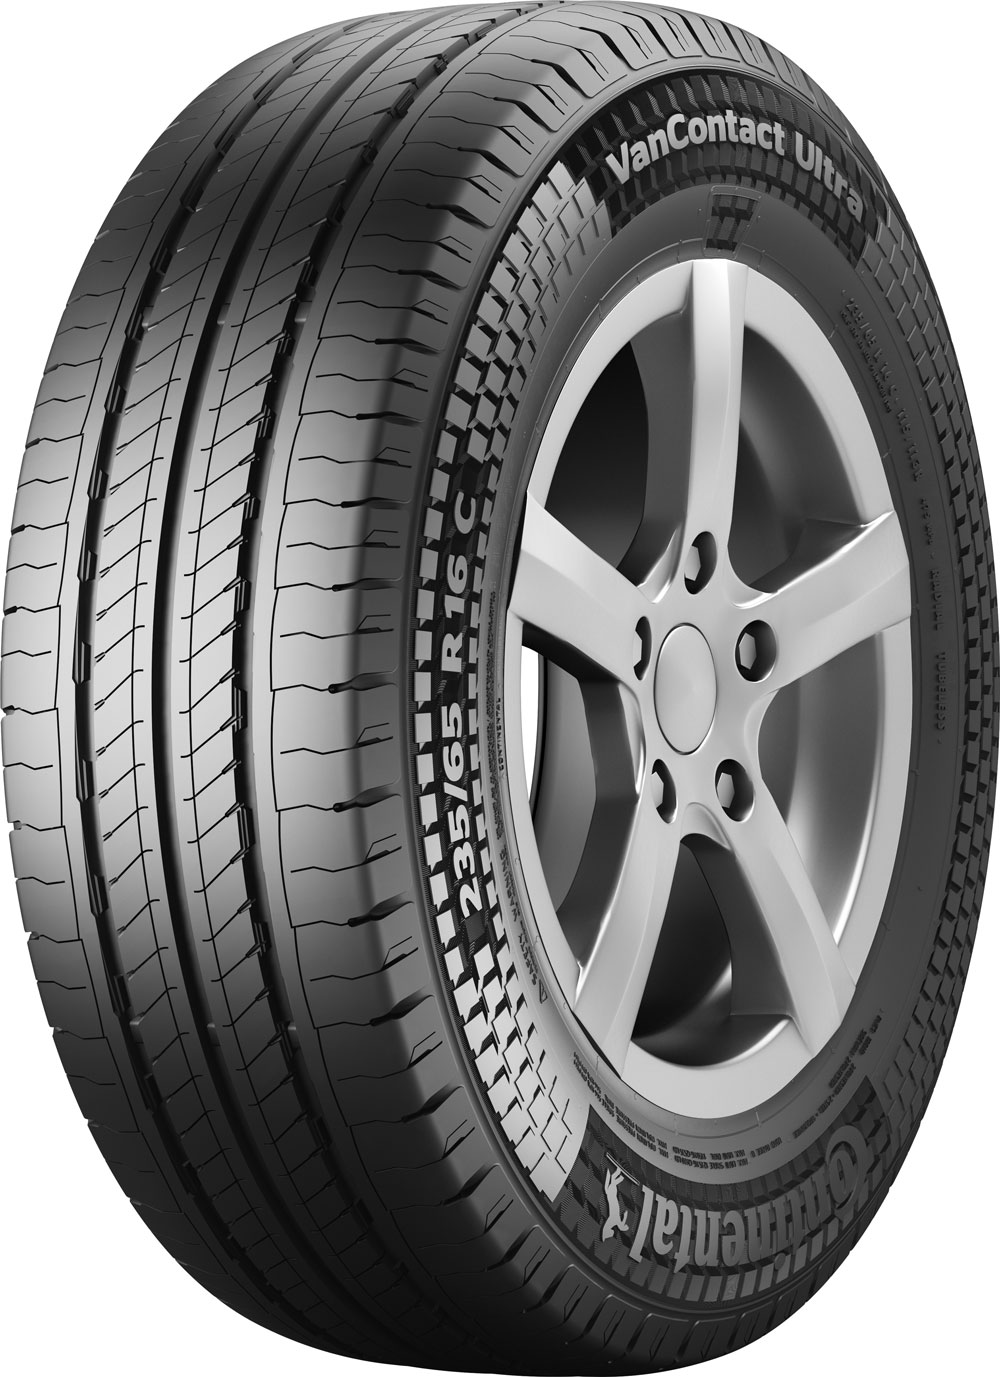 Anvelope microbuz CONTINENTAL VanContact Ultra 195/70 R15 104R